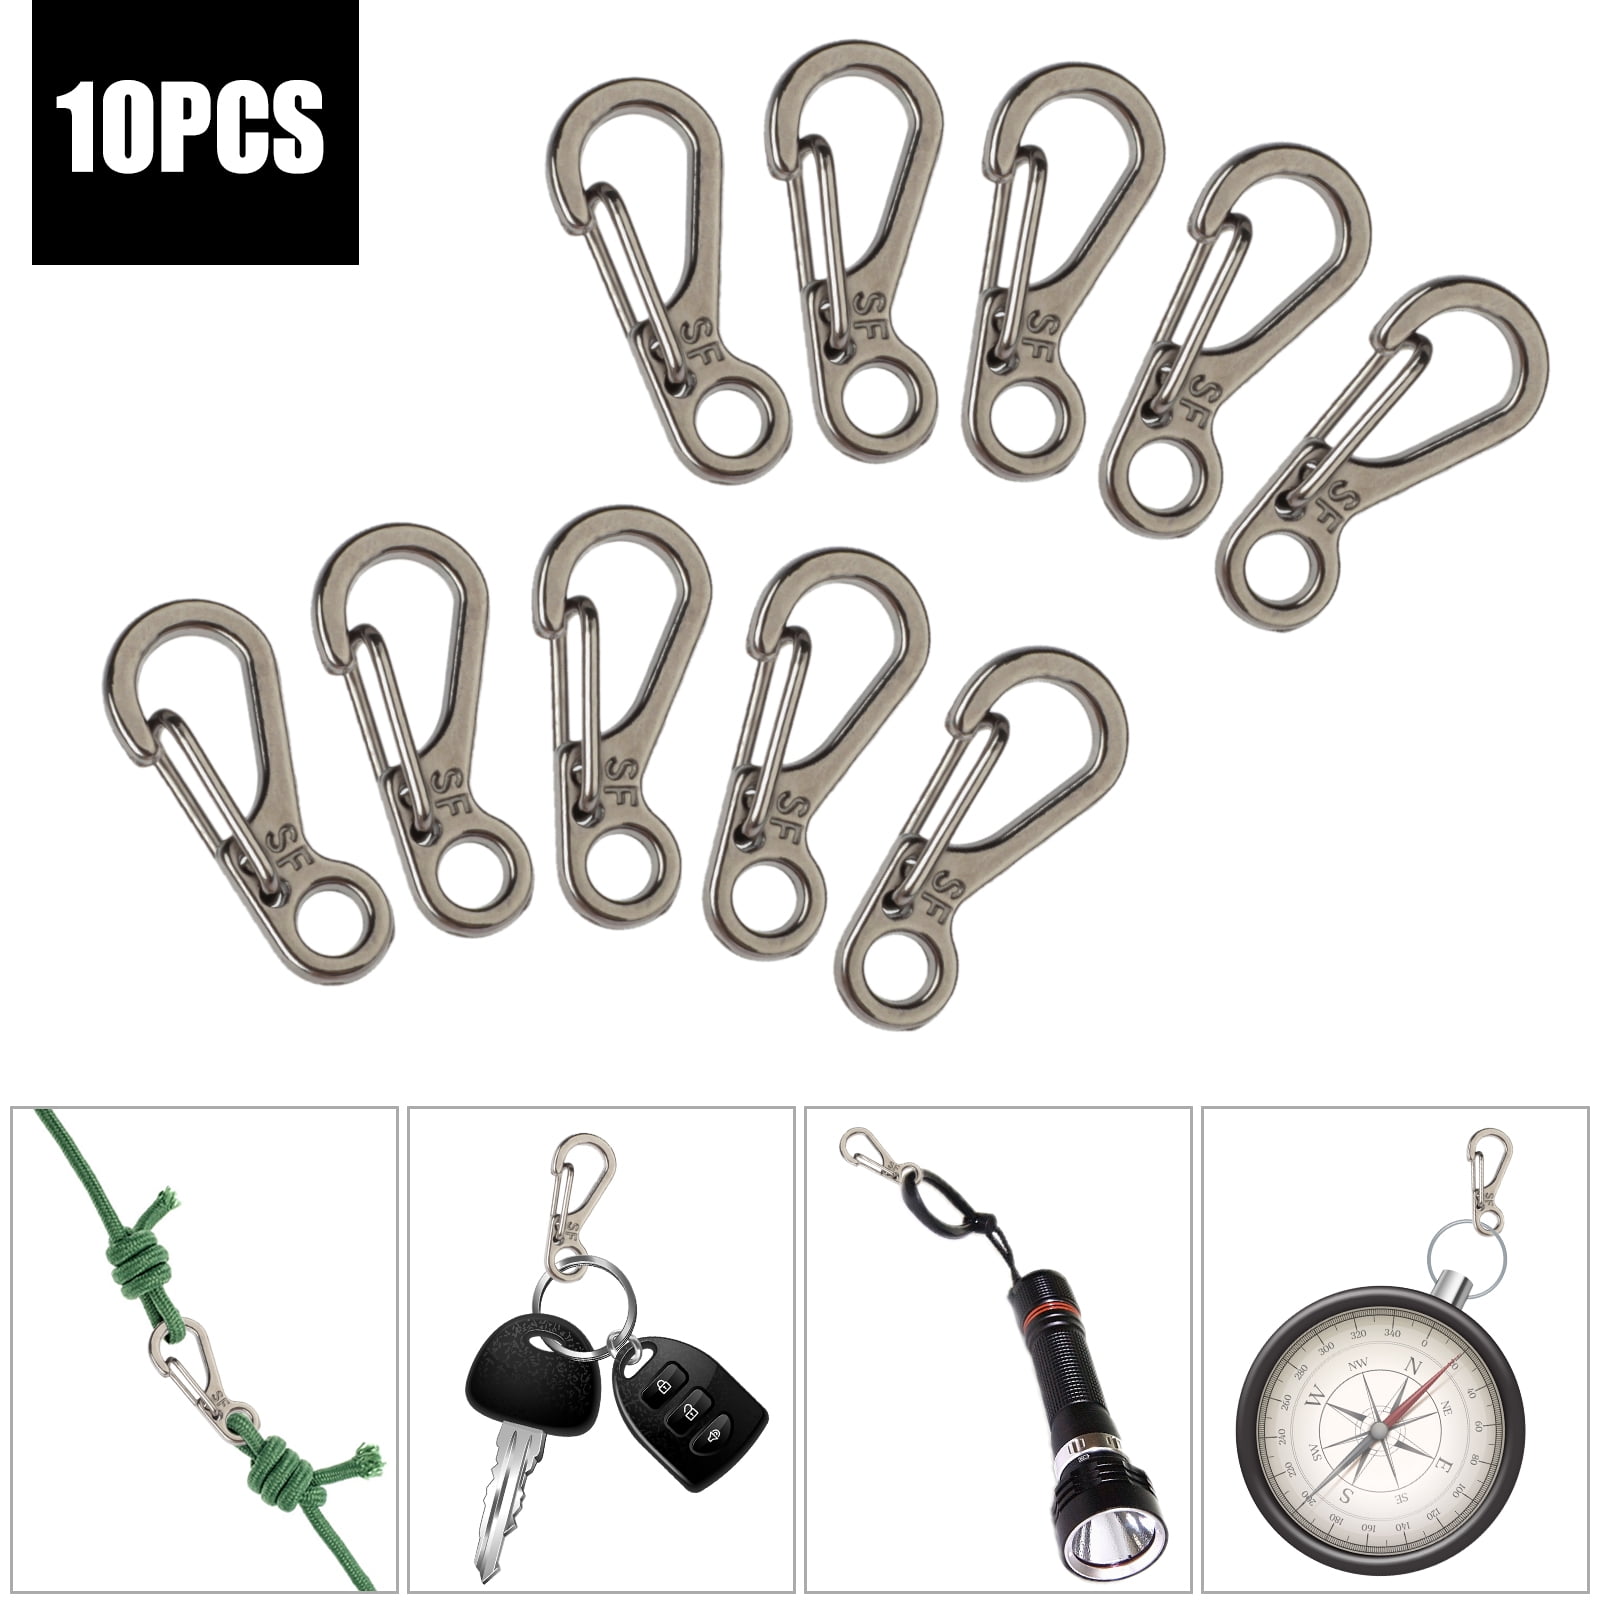 20x Outdoor Carabiner Camp Spring Snap Clip Hook Keychain Climbing Hiking 